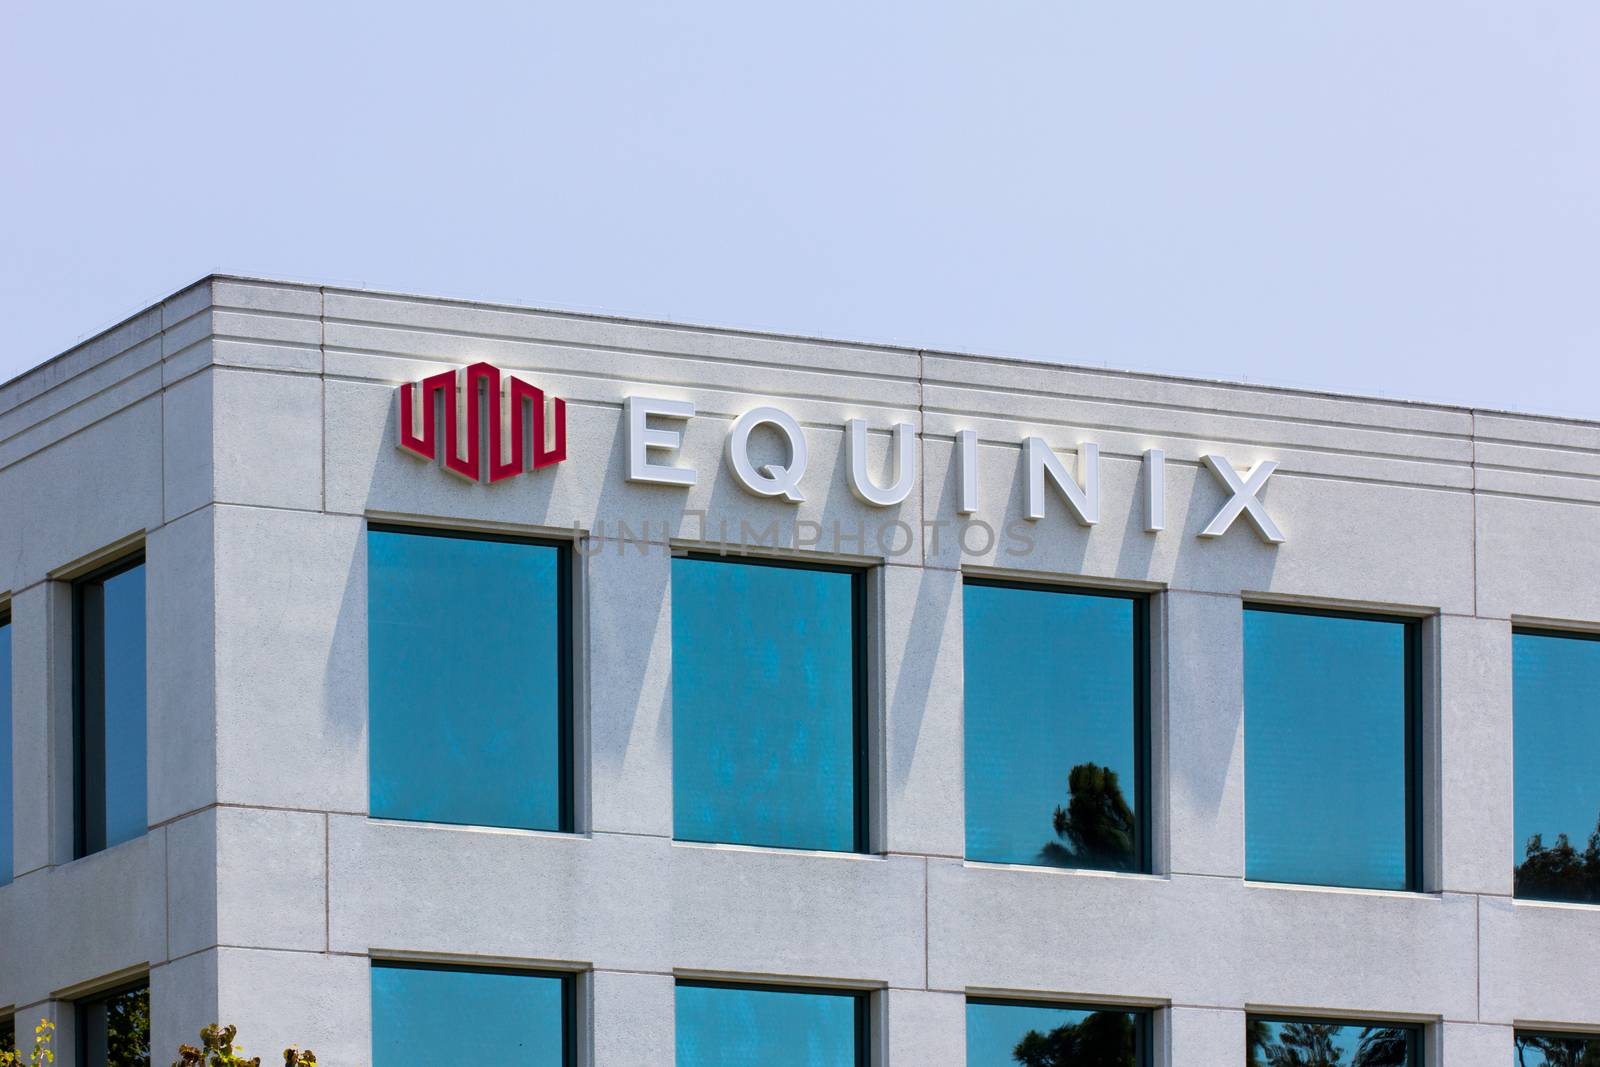 Equinix Corporate Headquarters by wolterk